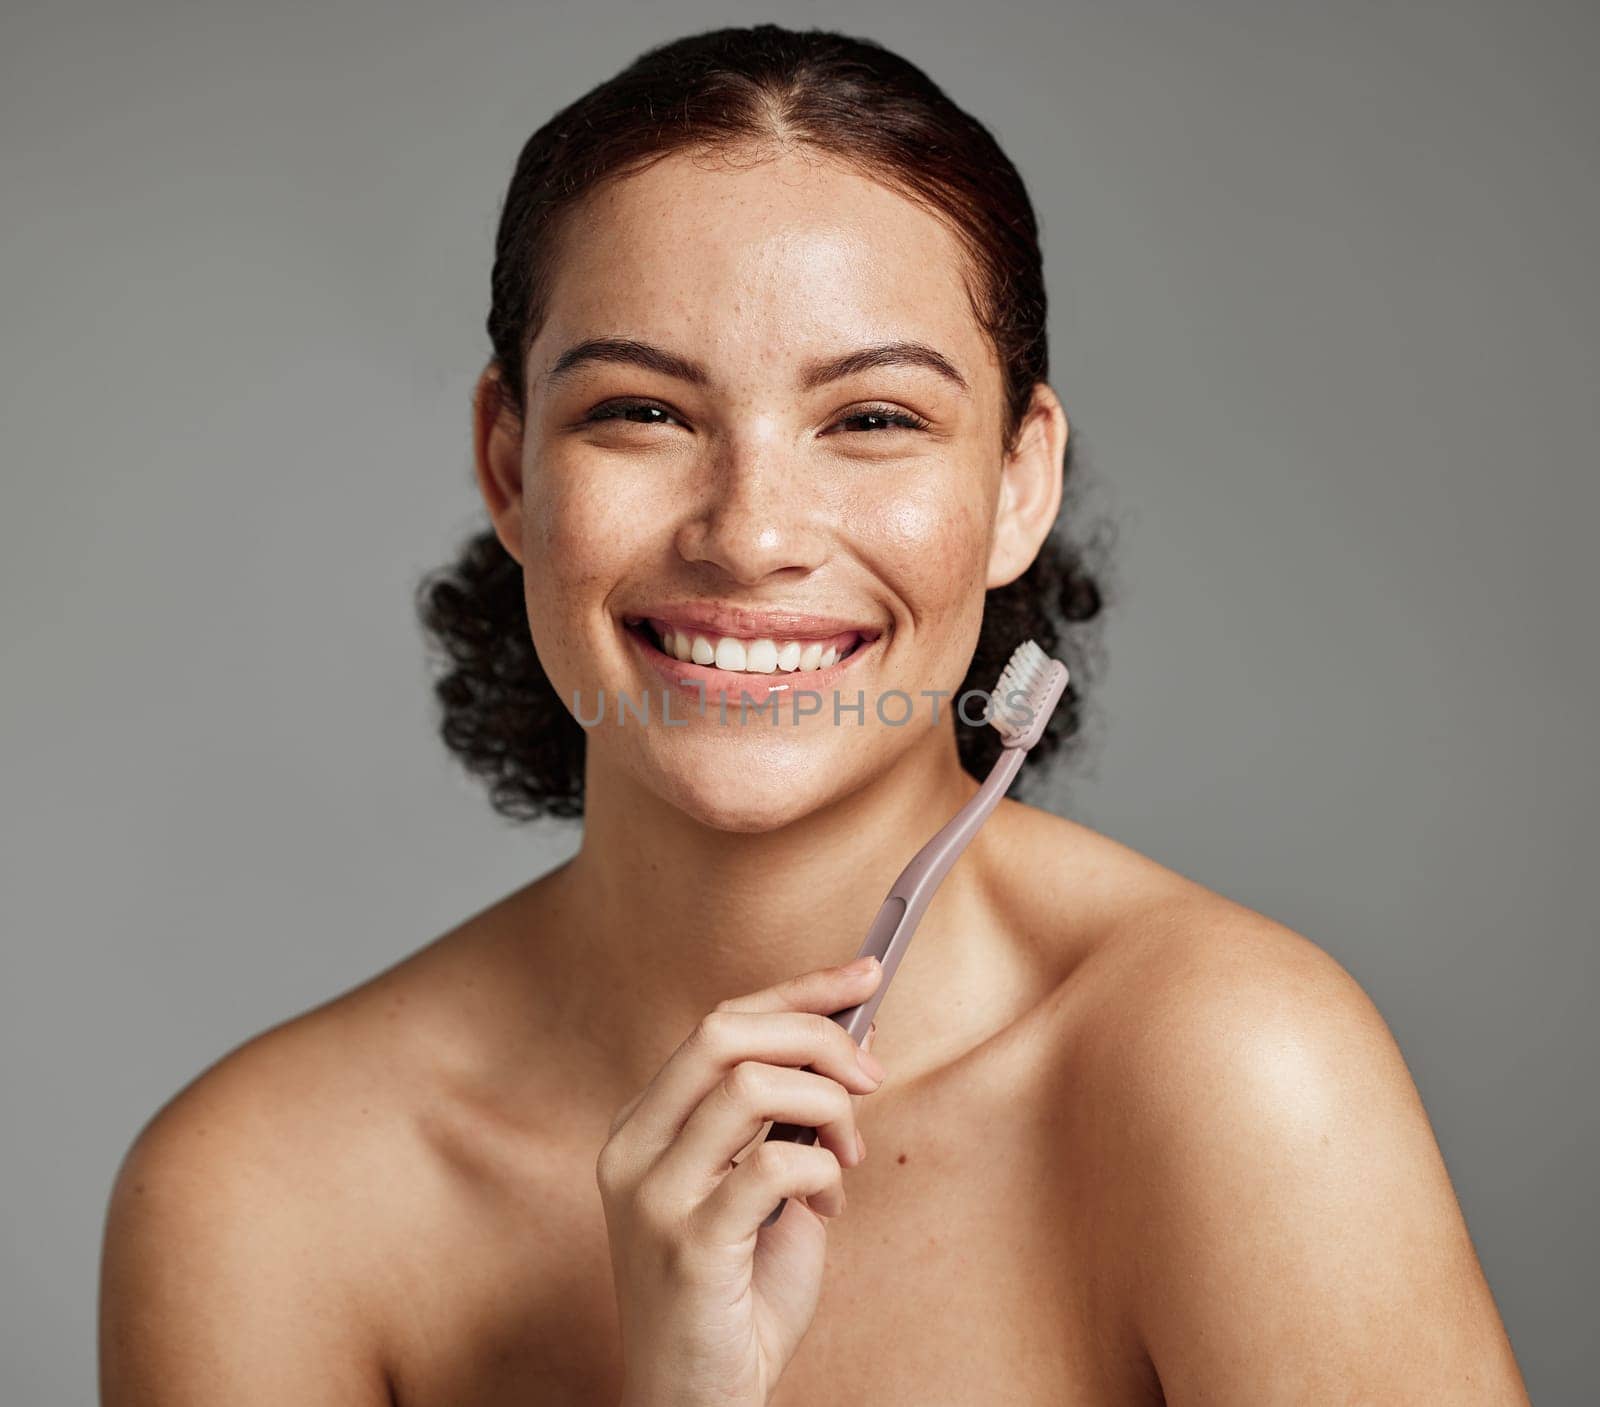 Dental portrait, toothbrush and a woman brushing teeth for hygiene, cleaning and teeth whitening for wellness. Face of happy female with a smile for oral health, healthy mouth and self care in studio.